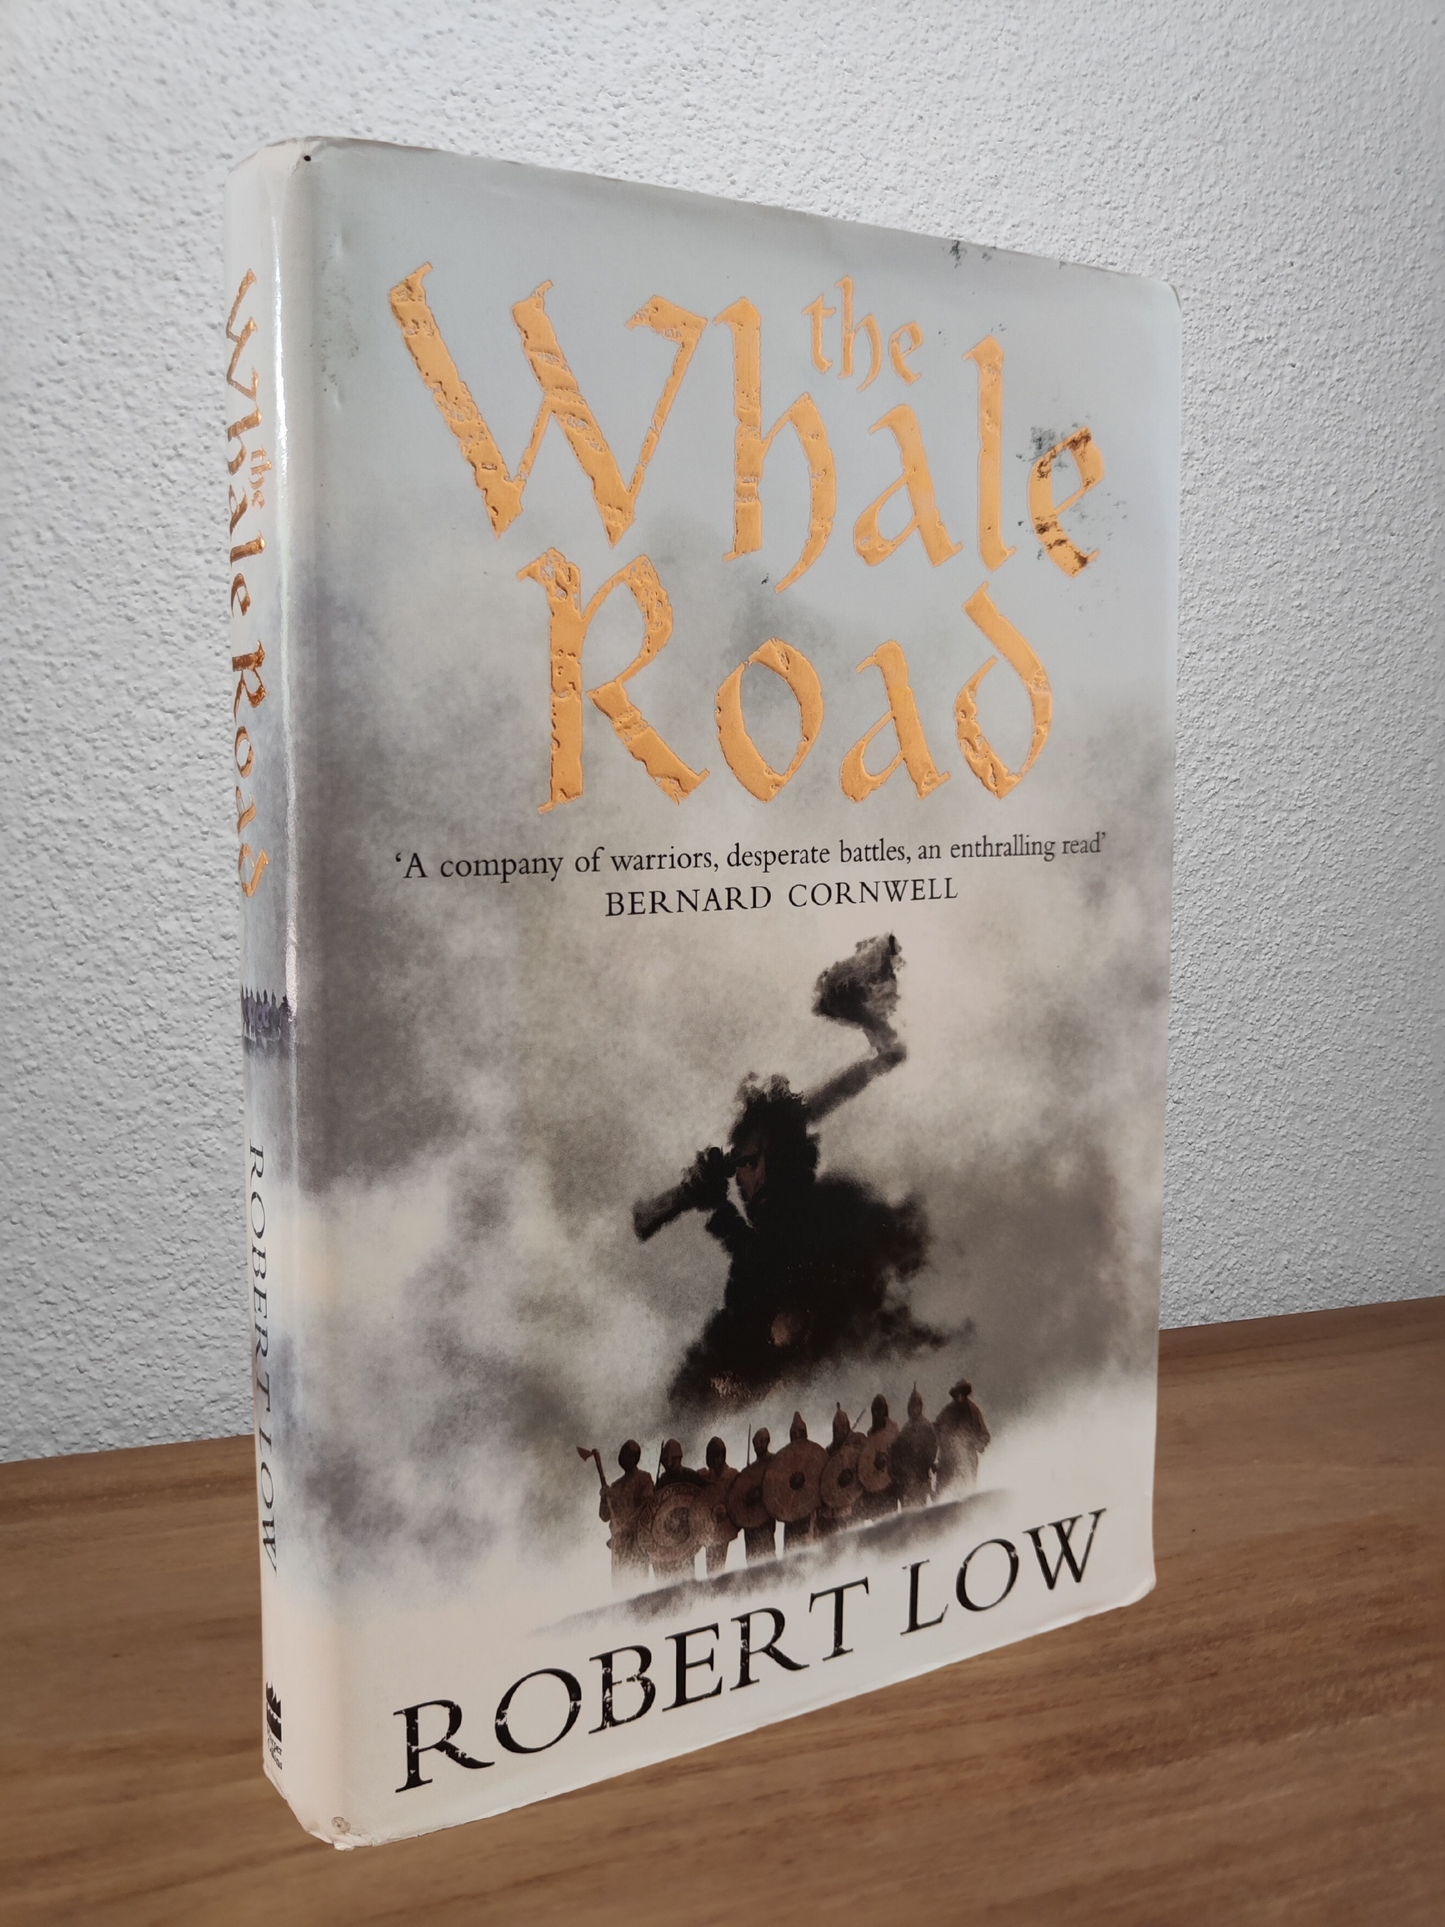 Robert Low - The Whale Road